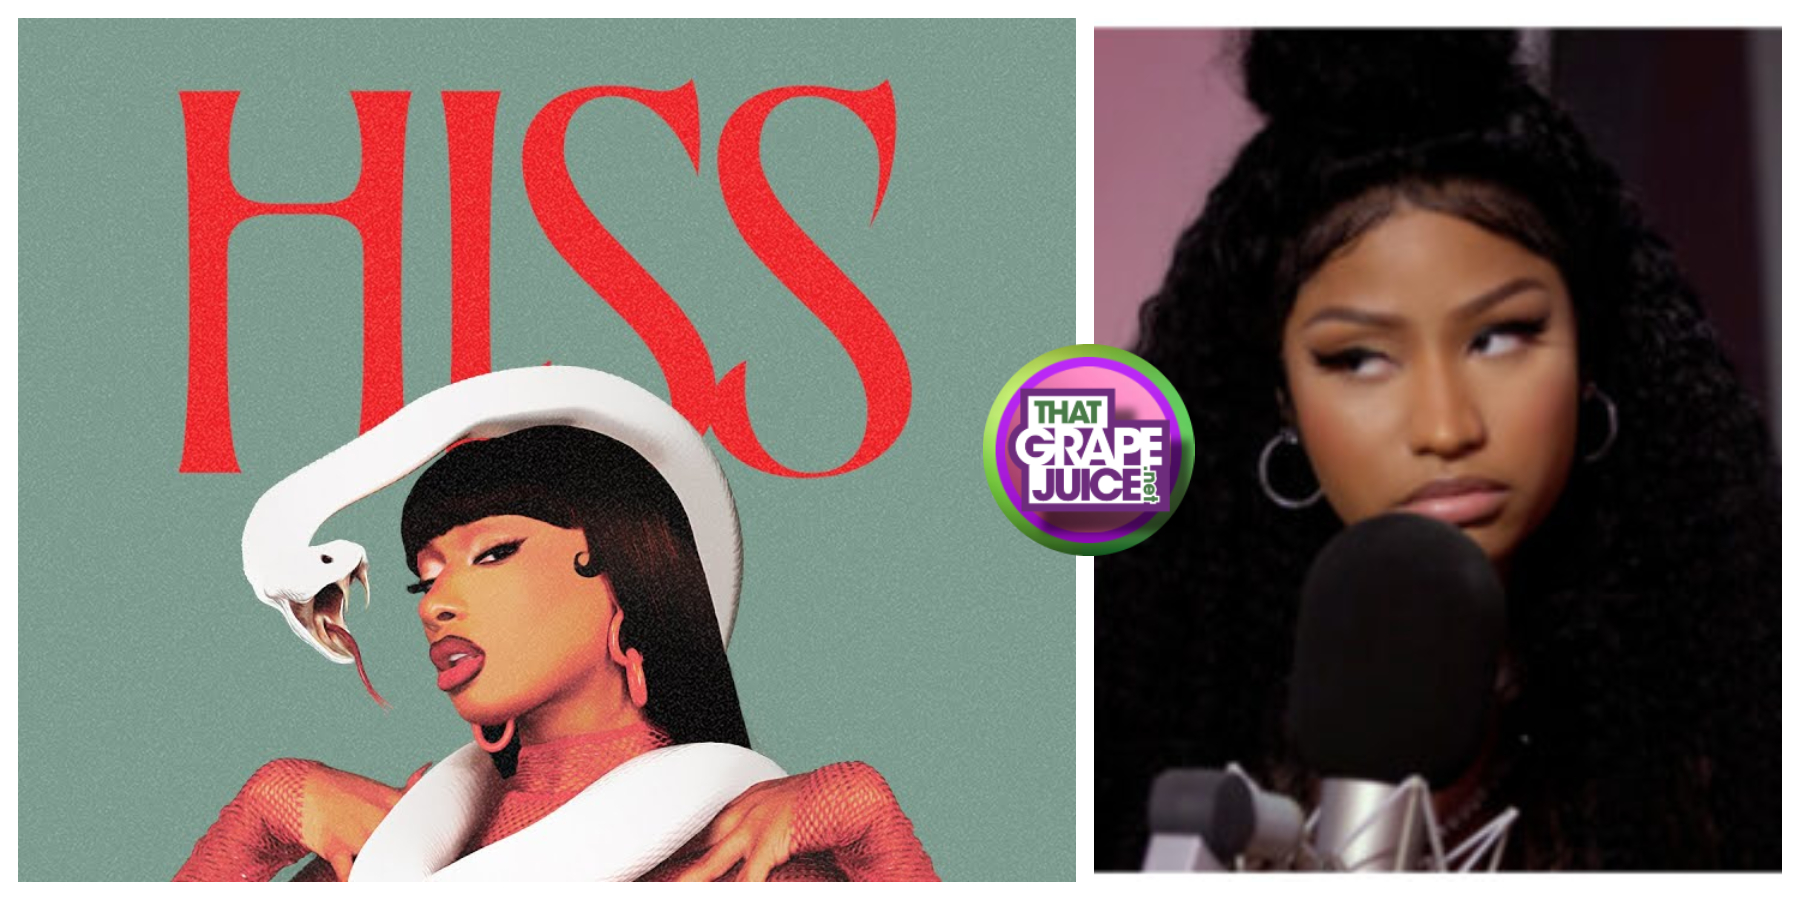 “Bullet-Fragment Foot B*tch”: Nicki Minaj Dares Megan Thee Stallion To Diss Her Family Again After ‘Hiss’